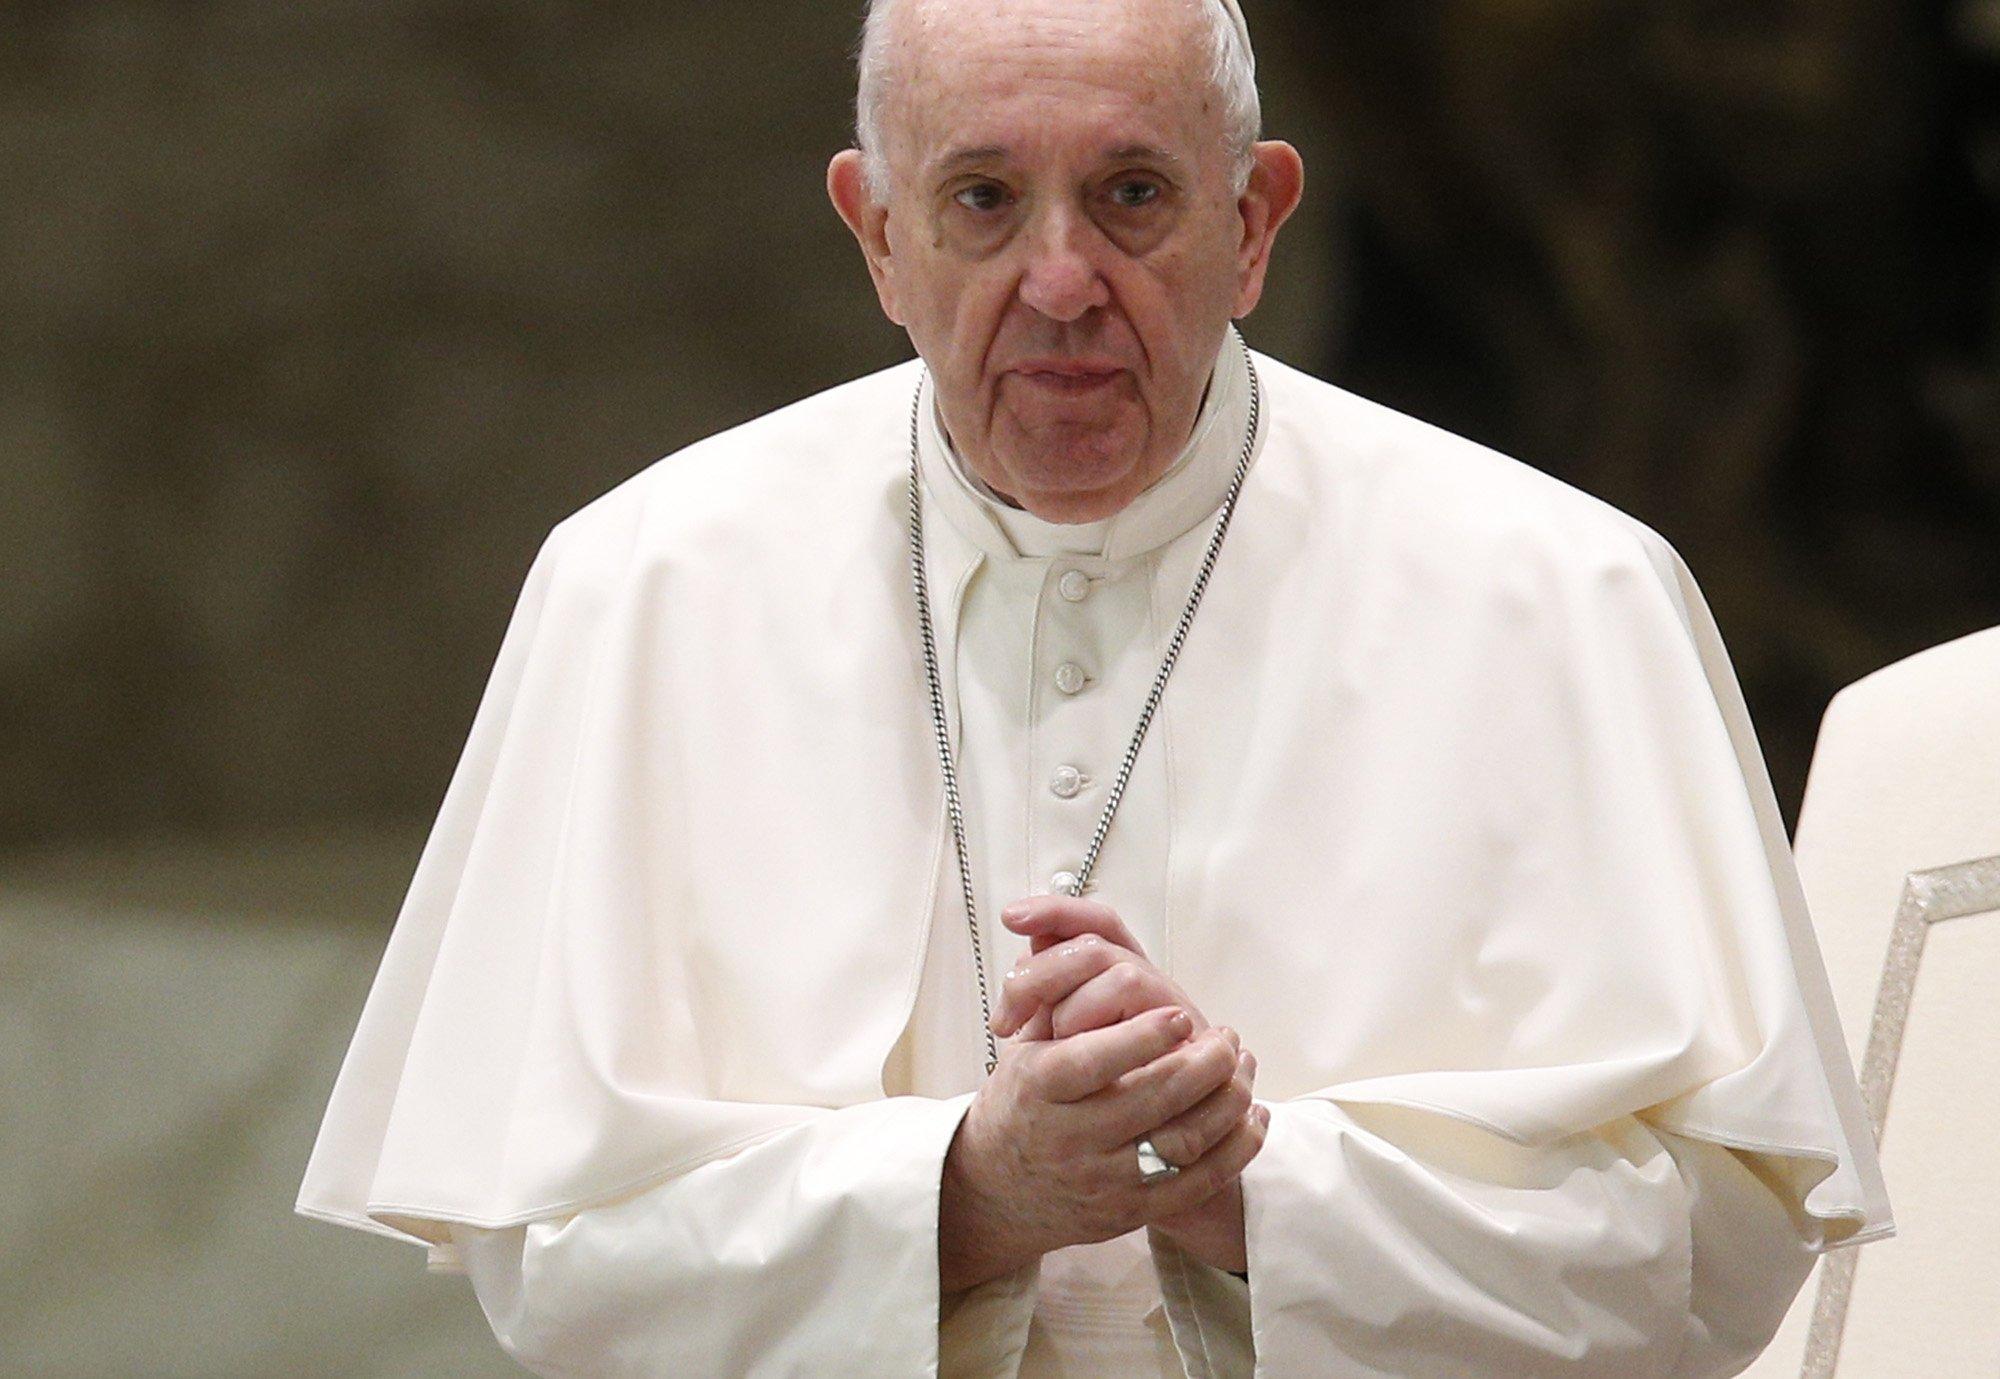 Church reform plans 'deeply worrying' says Pope